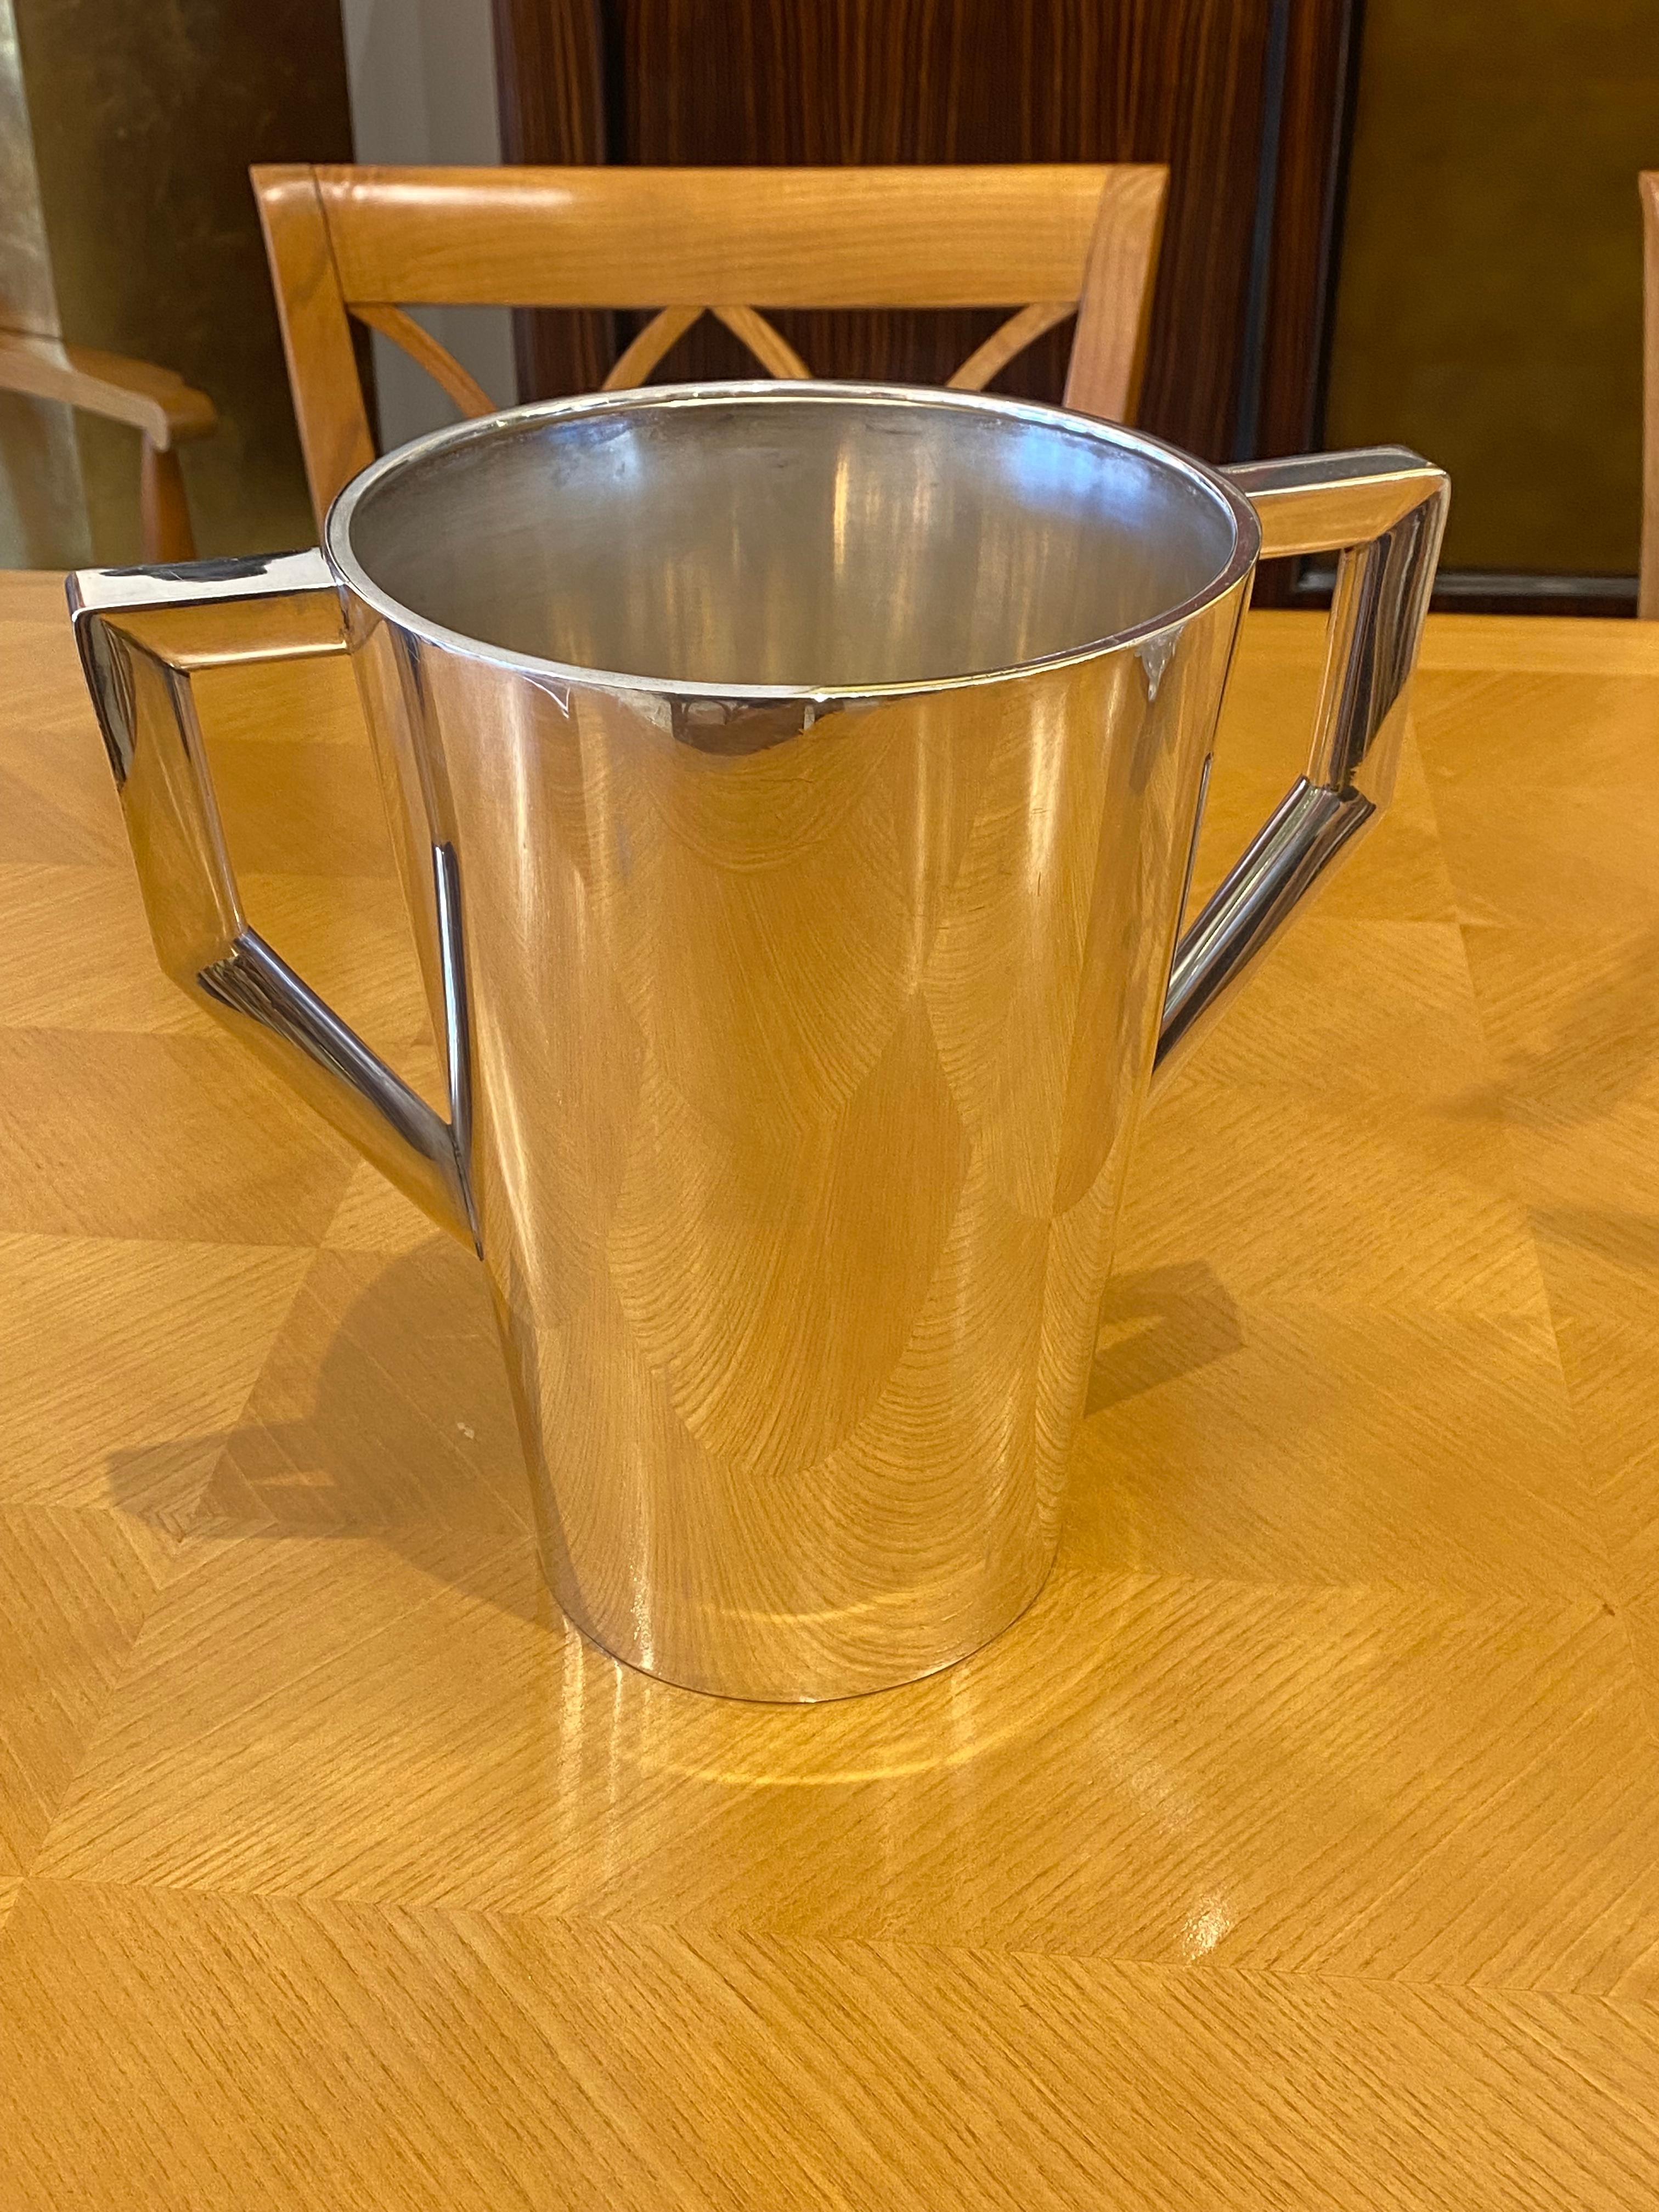 A minimalistic ice bucket in sterling silver.
Made in France.